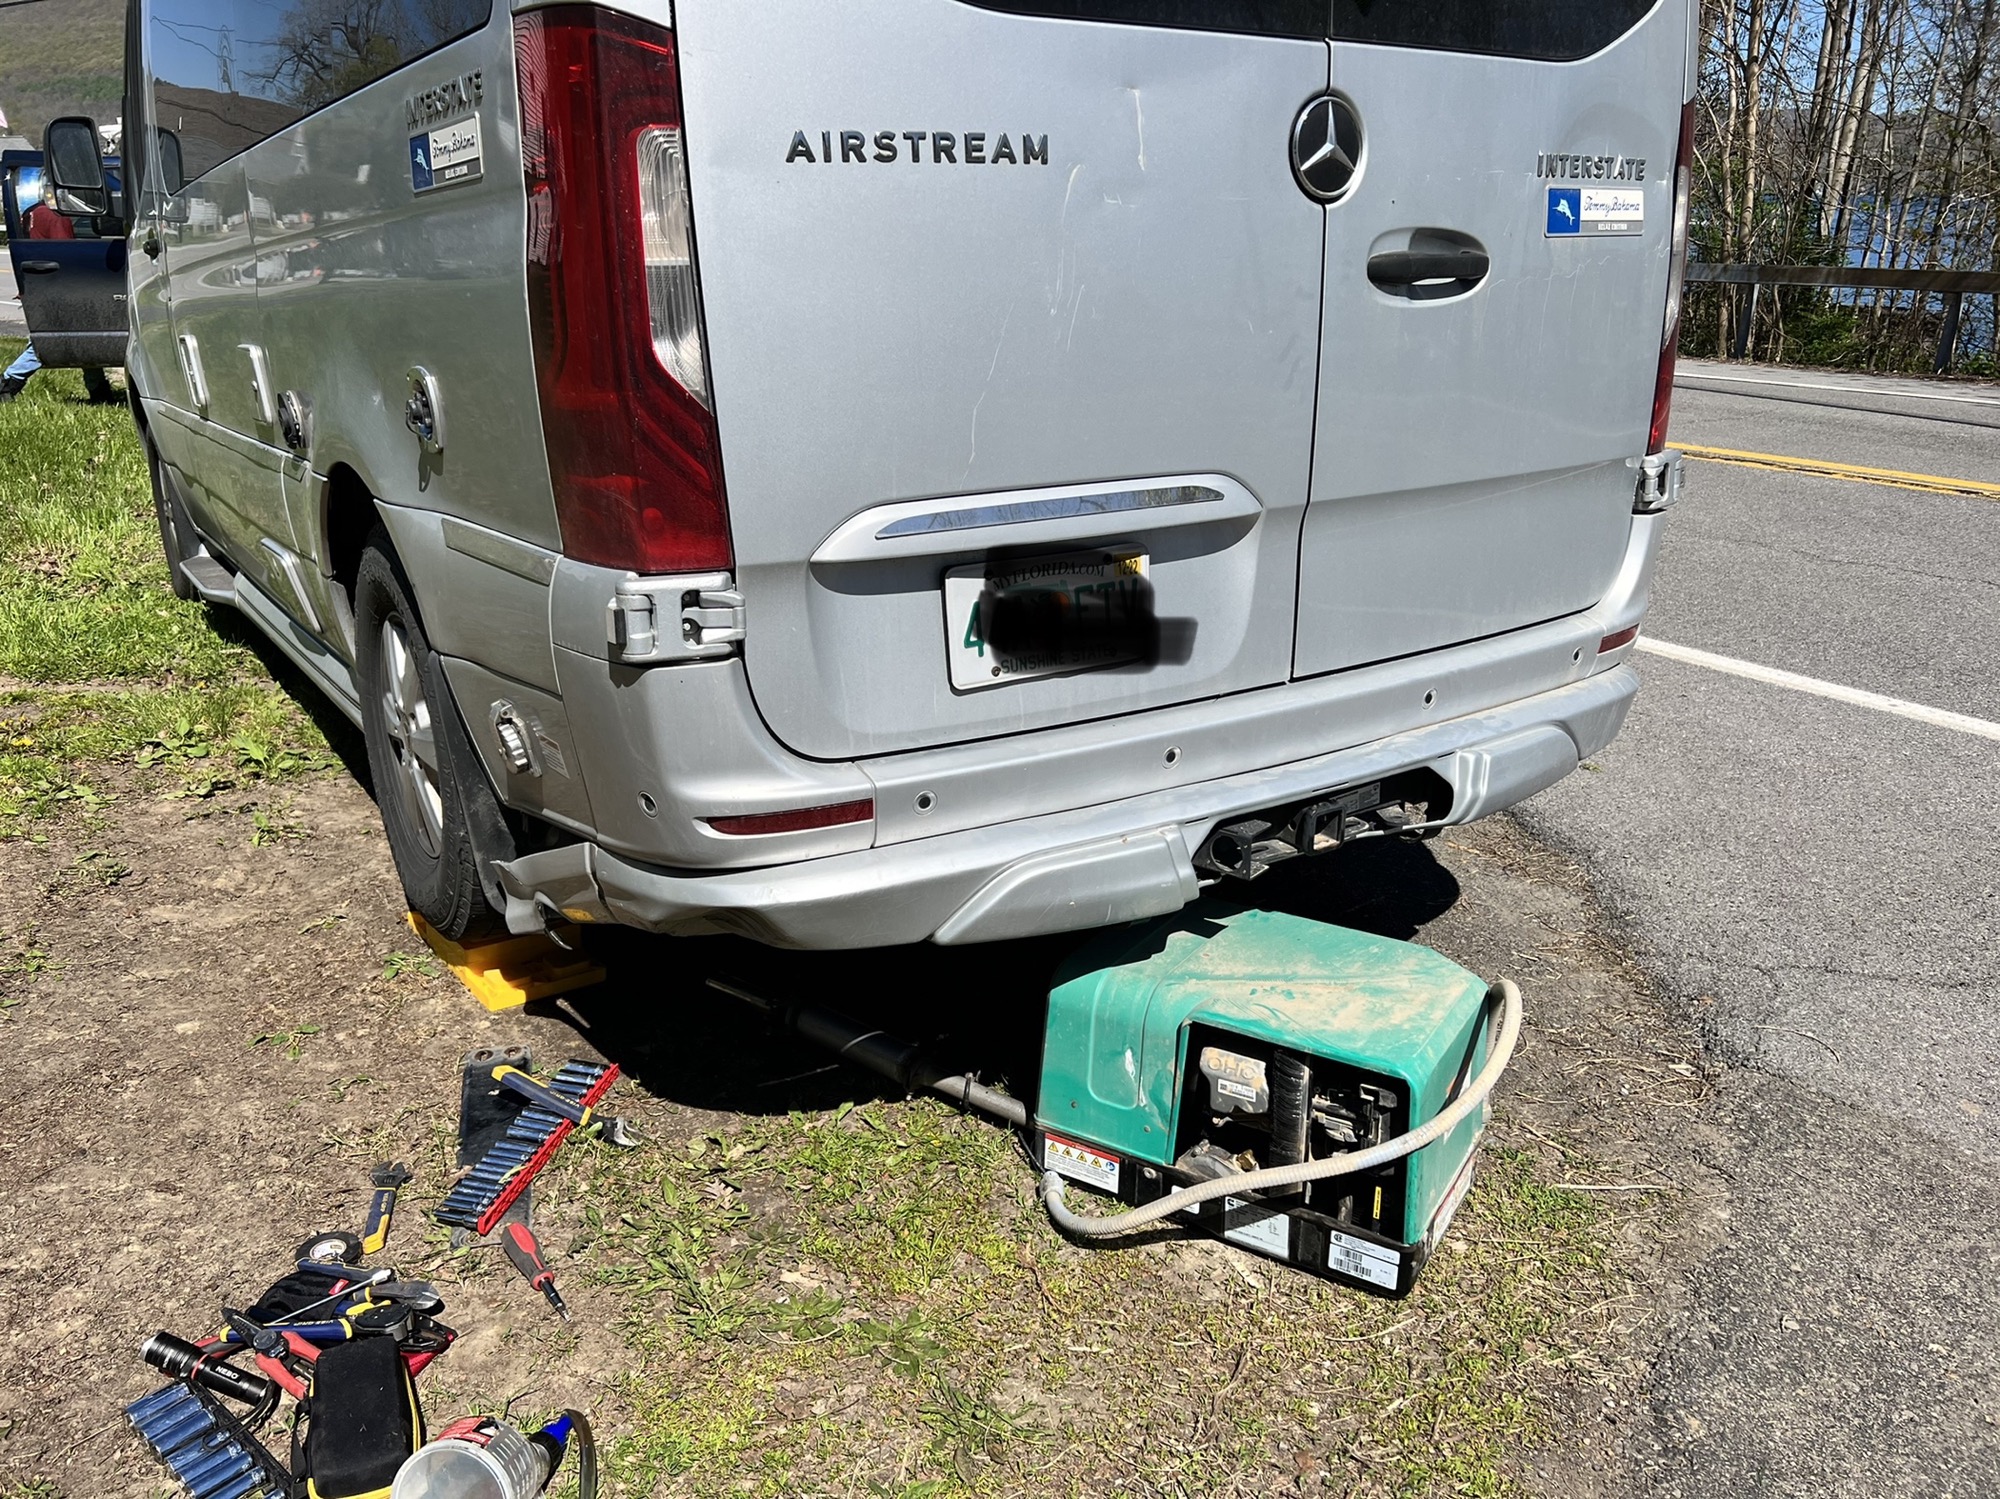 Generator removed from the van